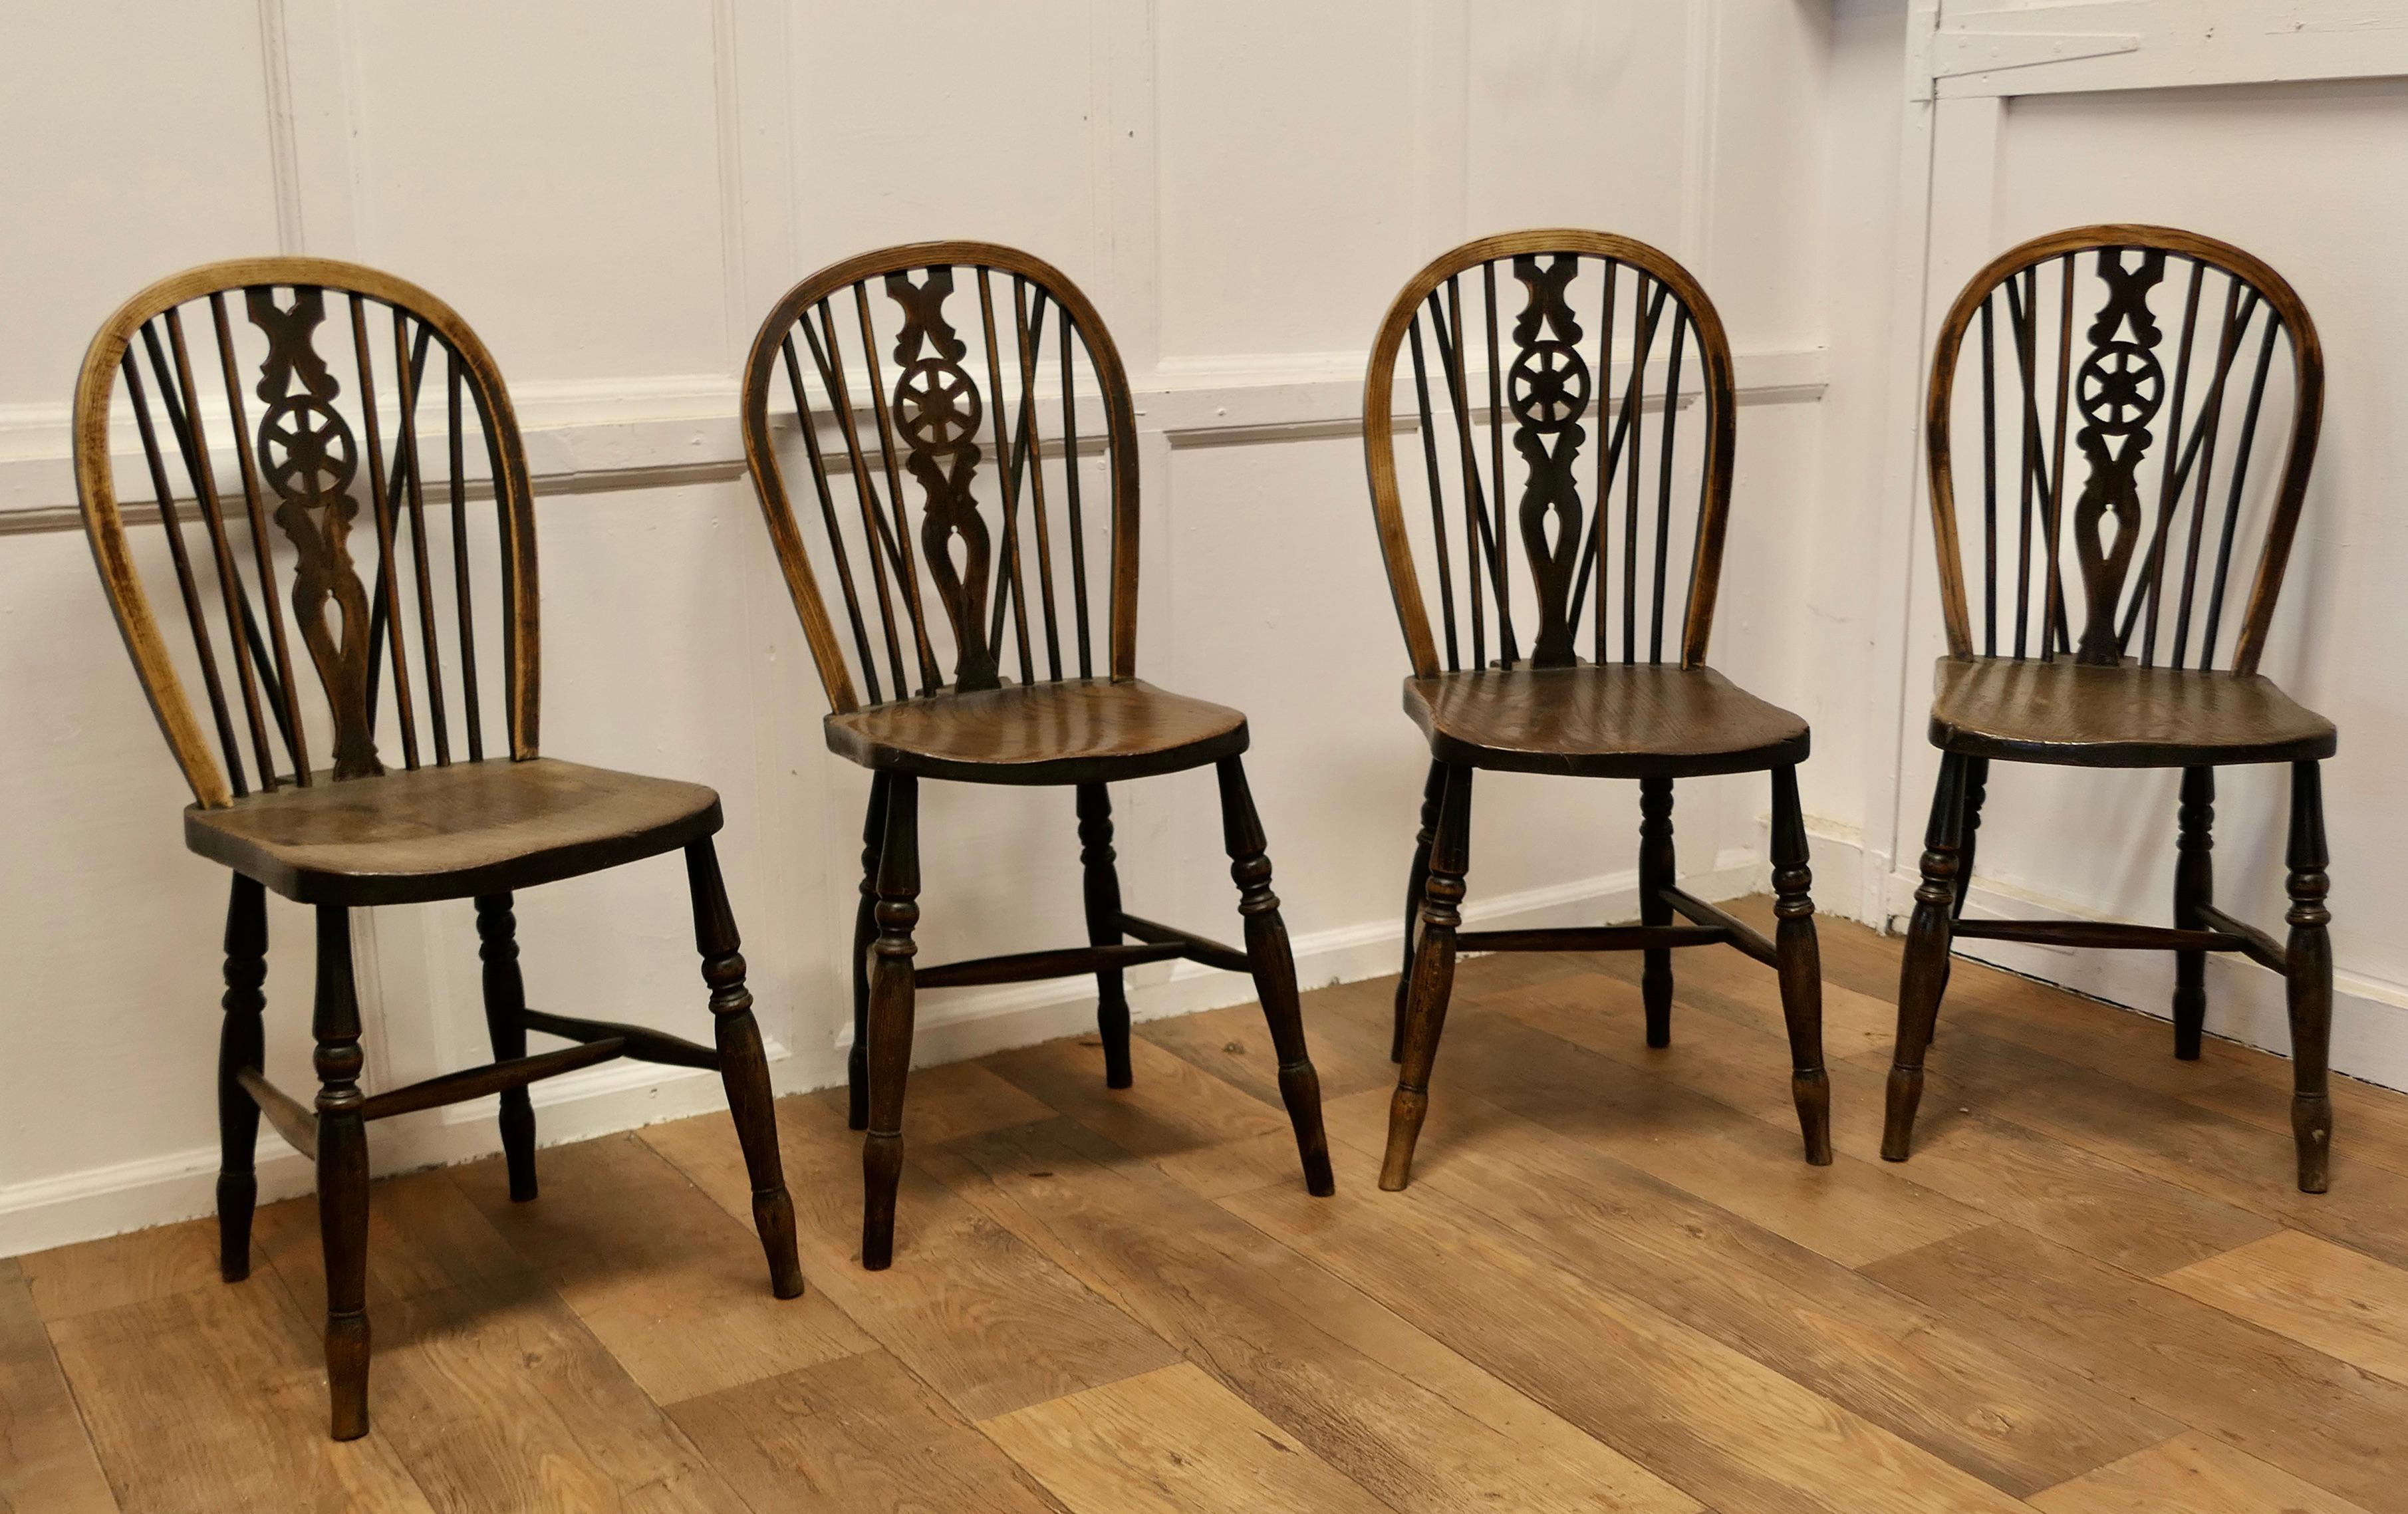 A Lovely Old Set of 4 Ash & Elm Wheel Back Windsor Kitchen Chairs


This is a 19th Century set, they are made in solid Ash and Em and have a hooped wedge back in the traditional Windsor style with spindles and a pierced centre splat in the shape of